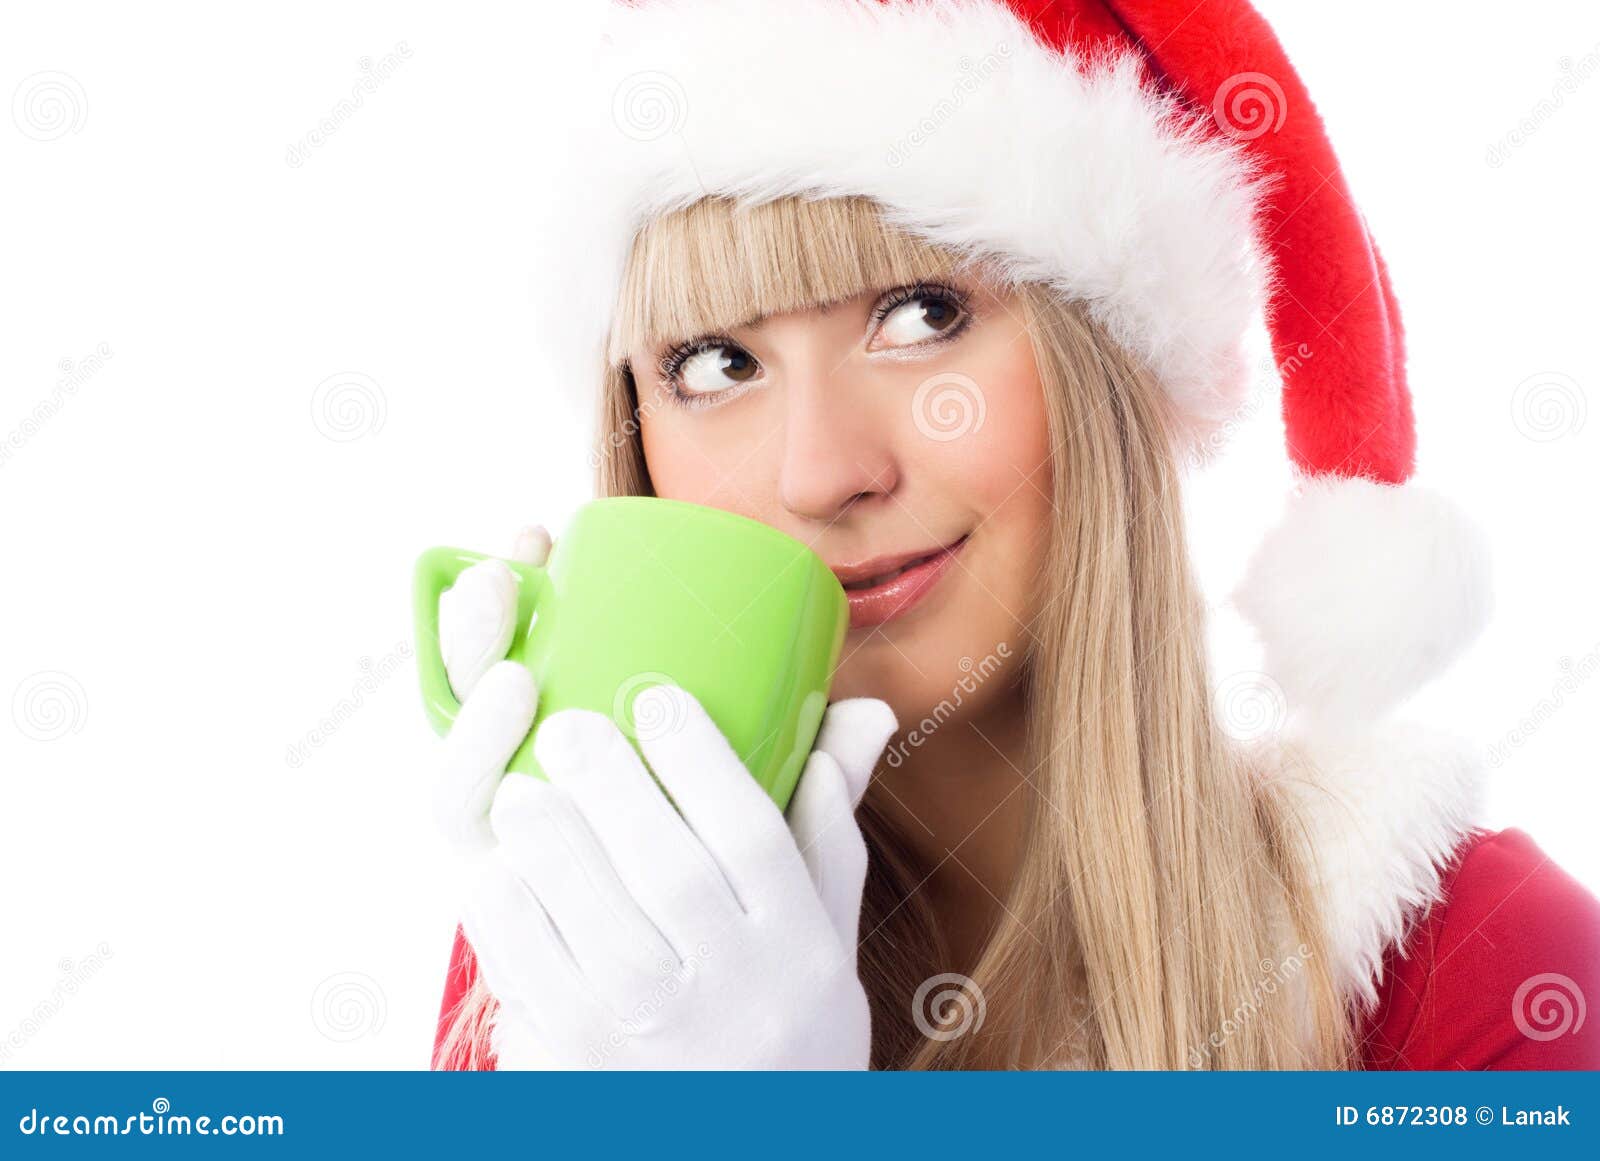 Dreamy Girl Having a Cup of Tea Stock Photo - Image of attractive ...